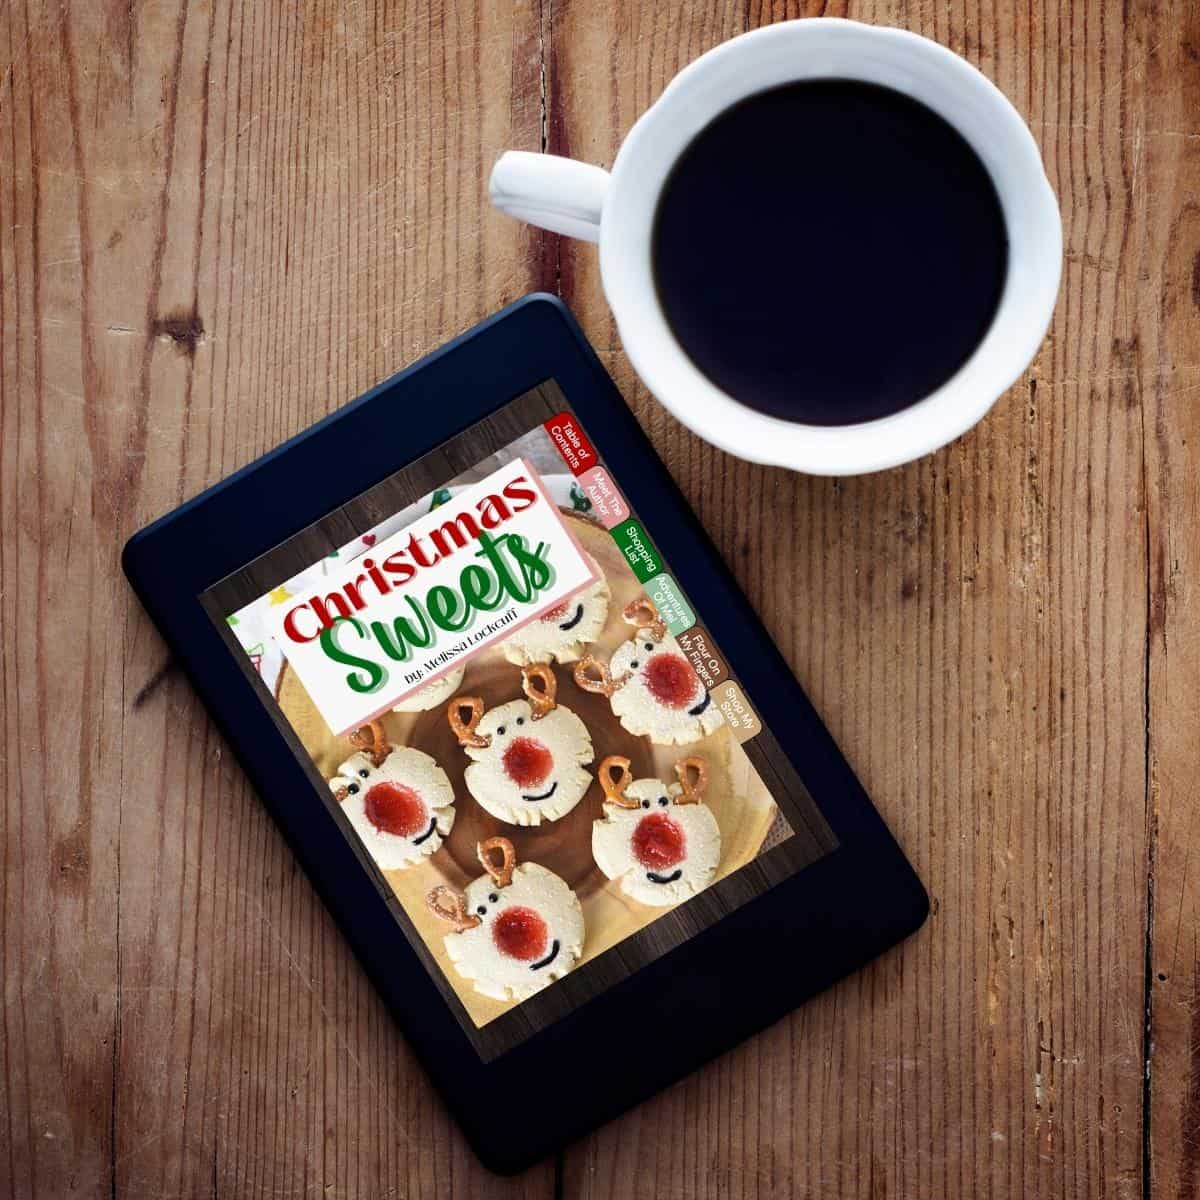 Christmas Sweets digital cookbook on tablet with cup of coffee